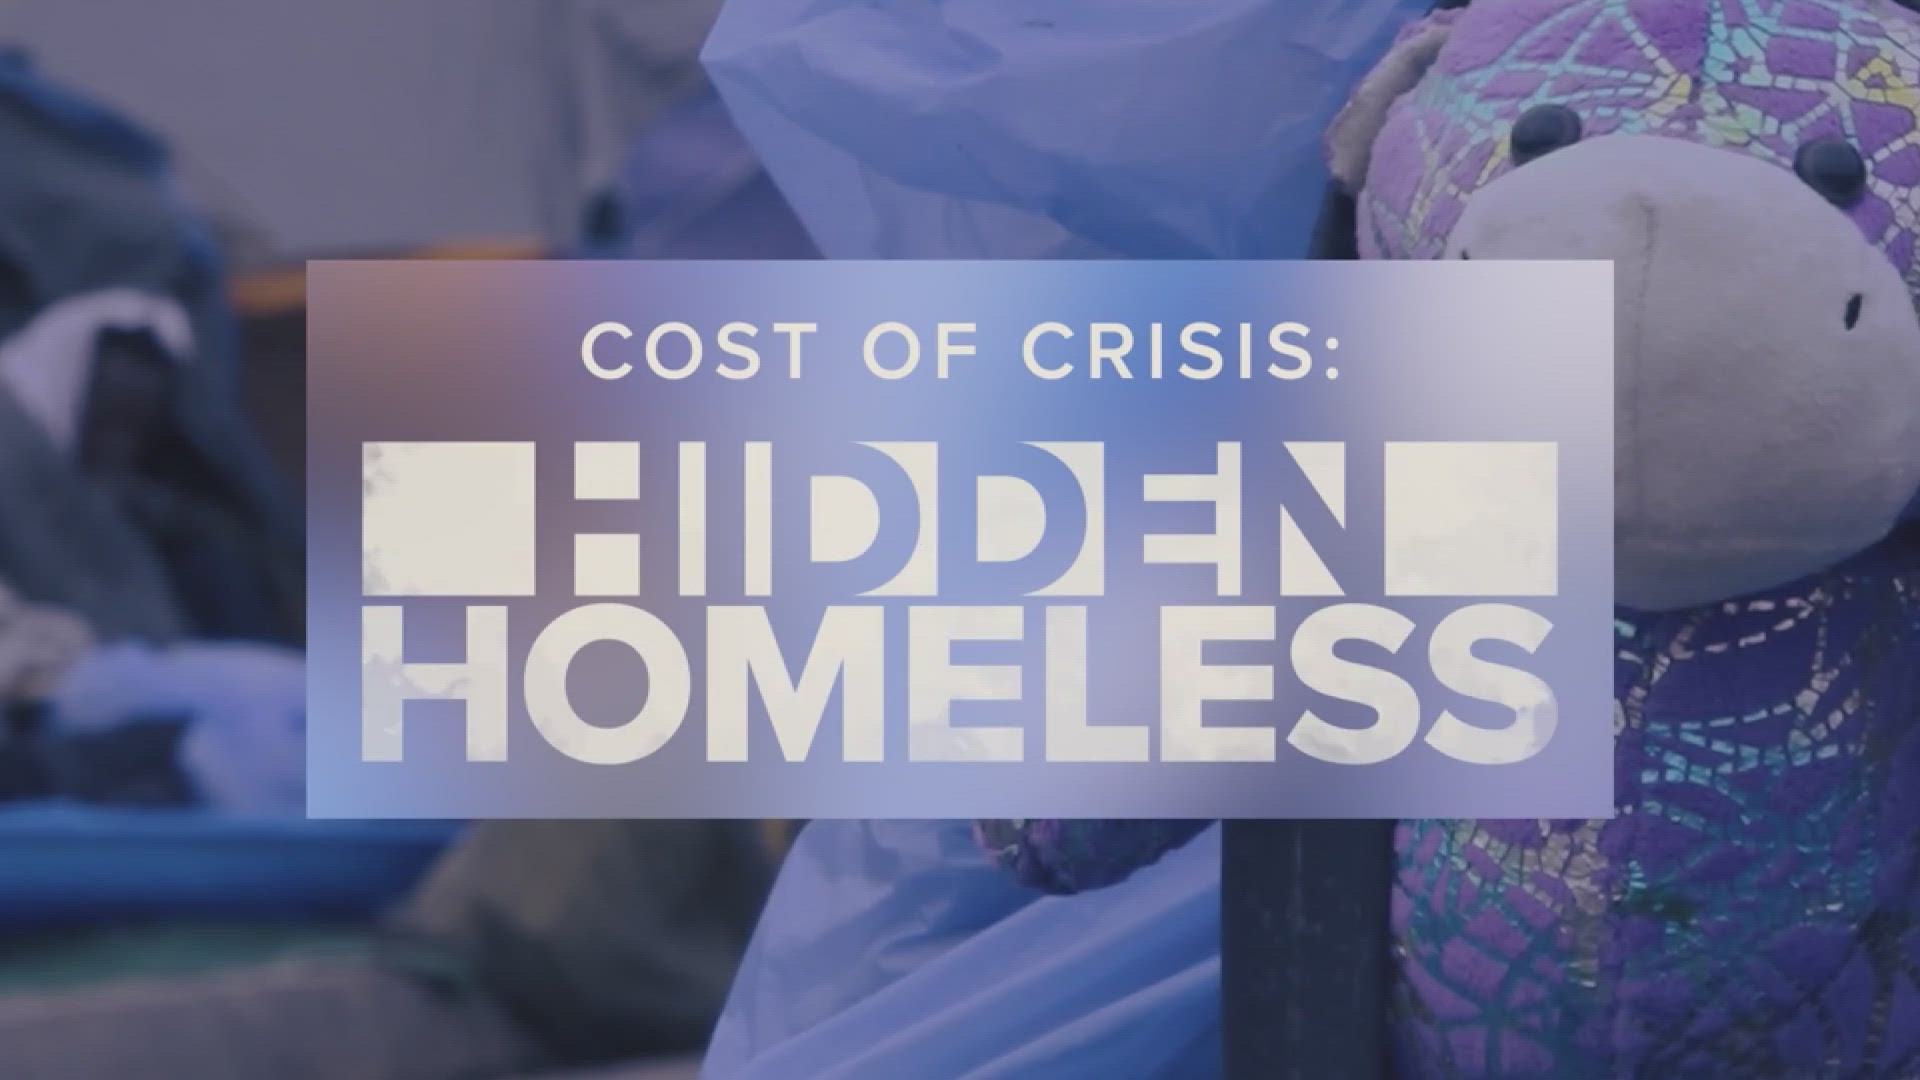 In December, Phoenix City Council reallocated $20 million to a fund dedicated to benefit homelessness and affordable housing.